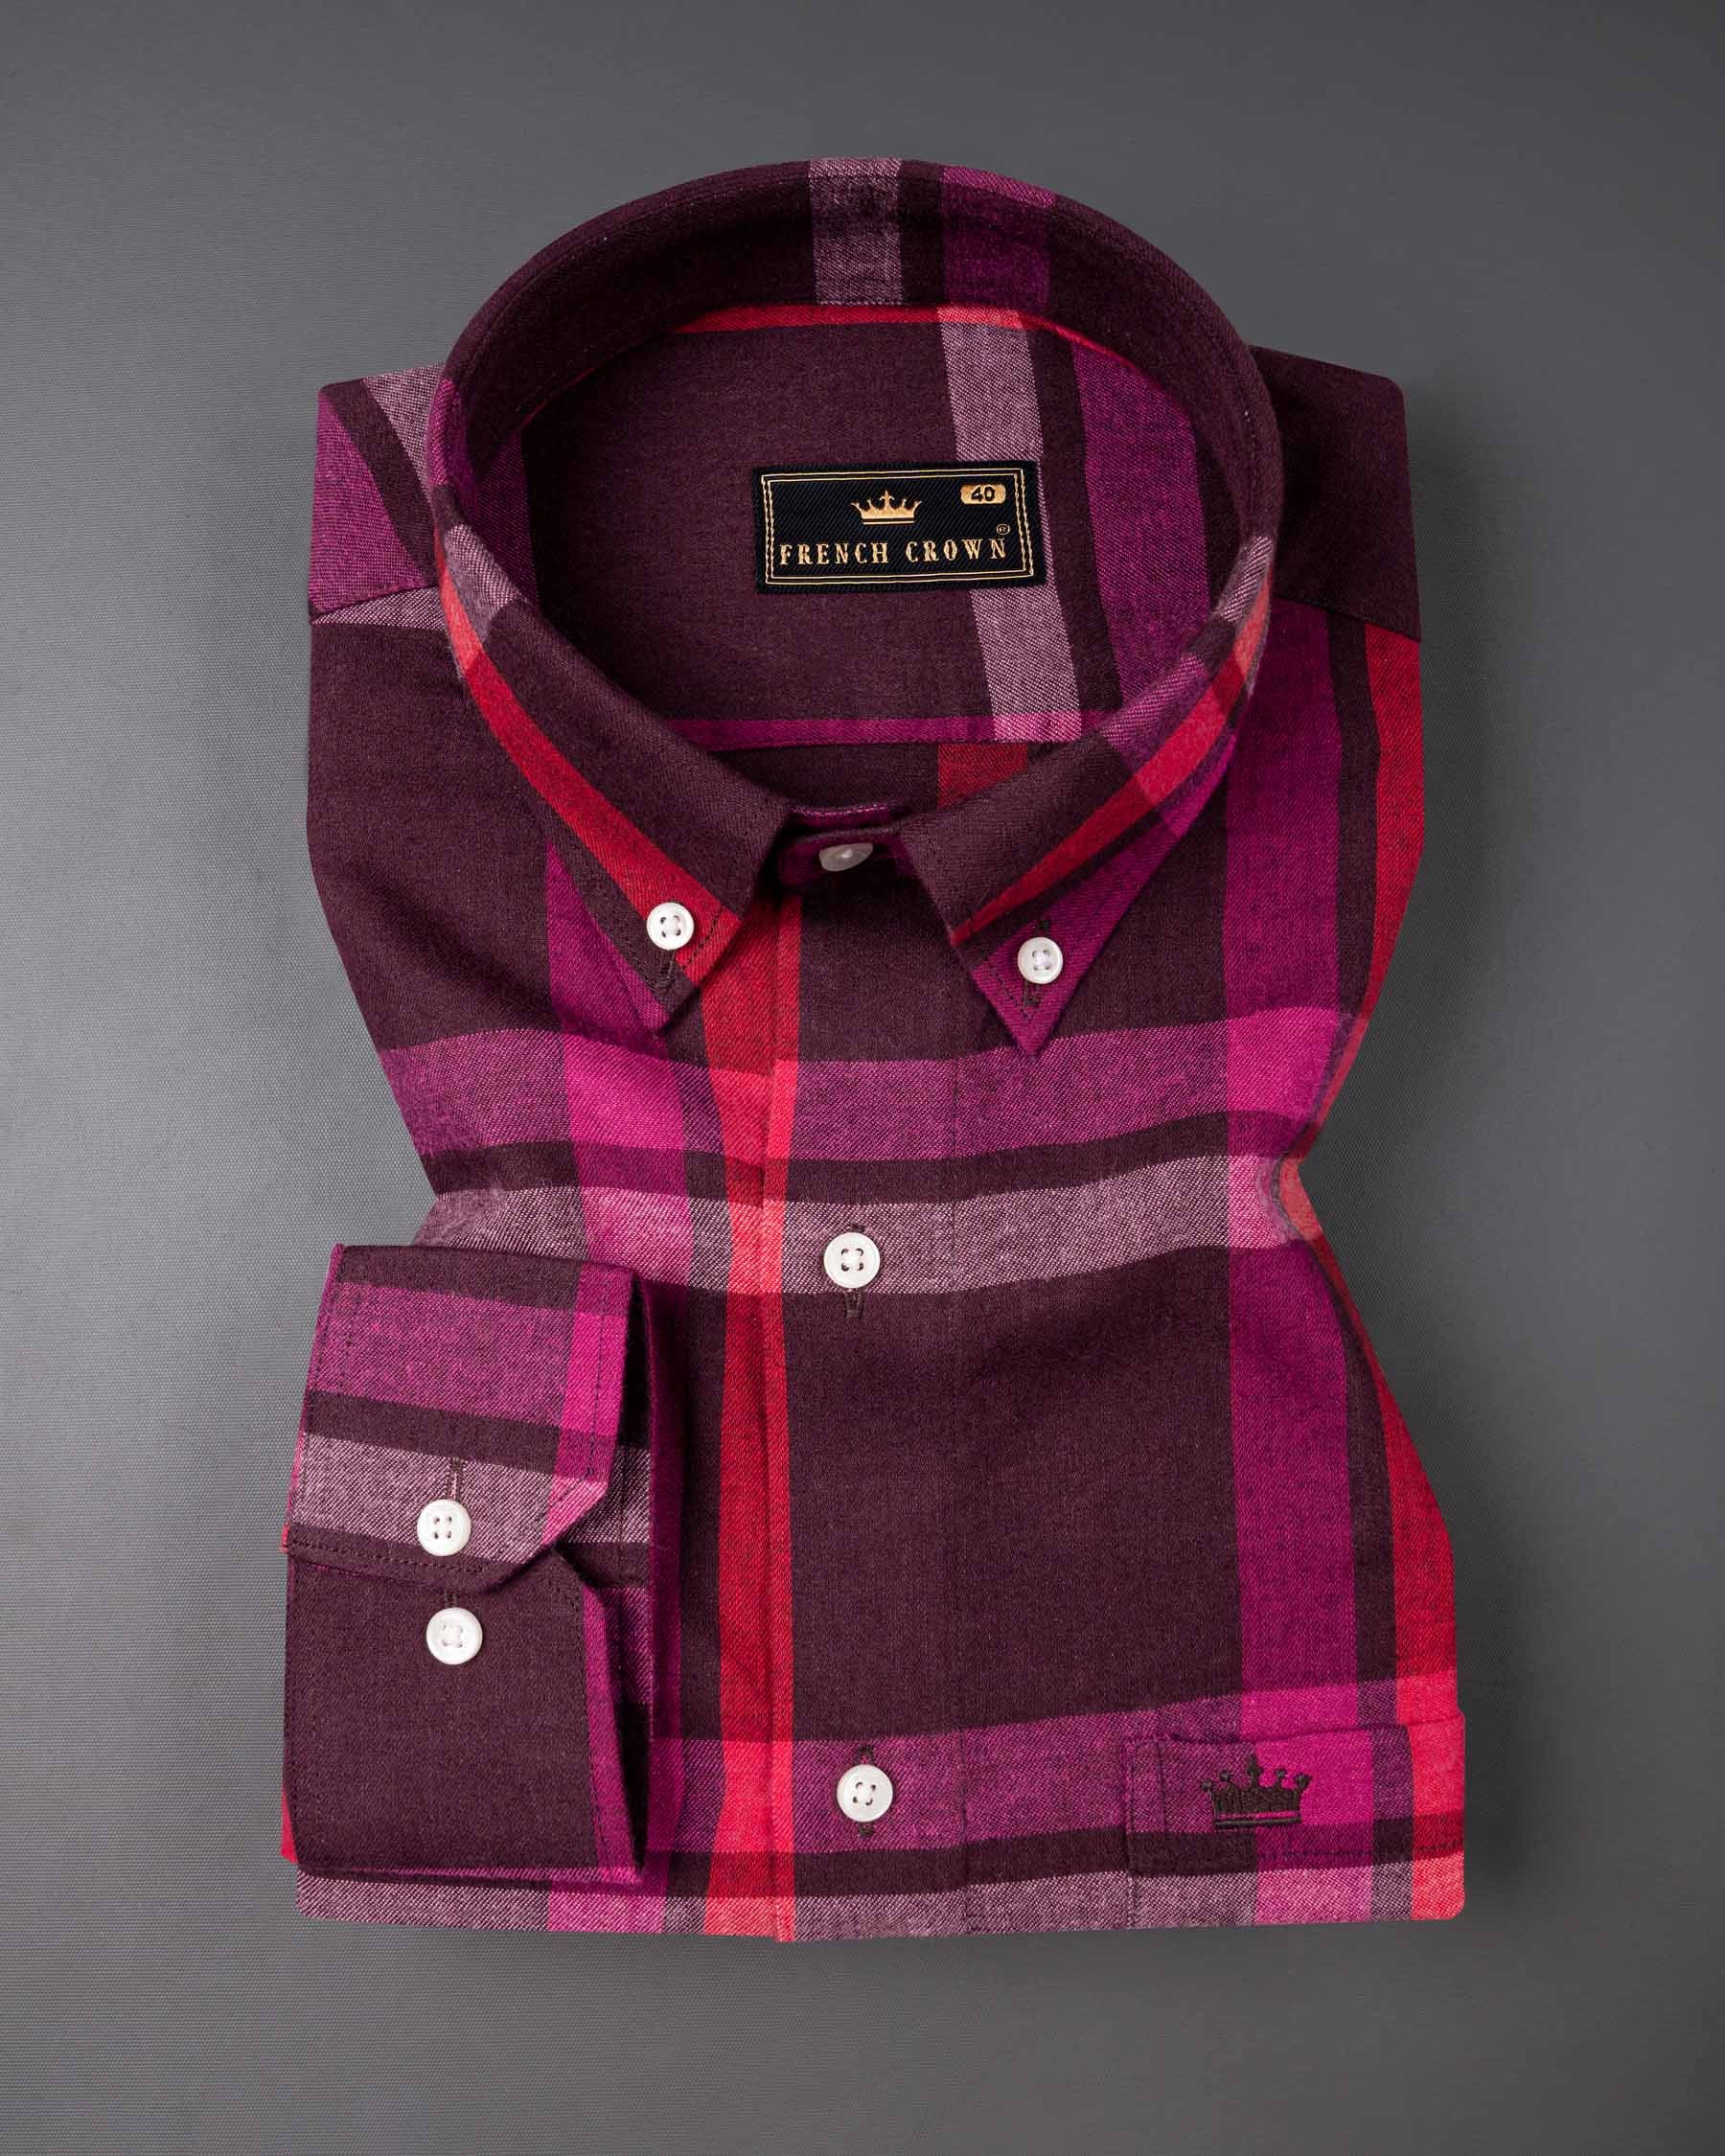 English Walnut and Mulberry Pink Plaid Flannel Shirt 6438-BD-38, 6438-BD-H-38, 6438-BD-39, 6438-BD-H-39, 6438-BD-40, 6438-BD-H-40, 6438-BD-42, 6438-BD-H-42, 6438-BD-44, 6438-BD-H-44, 6438-BD-46, 6438-BD-H-46, 6438-BD-48, 6438-BD-H-48, 6438-BD-50, 6438-BD-H-50, 6438-BD-52, 6438-BD-H-52